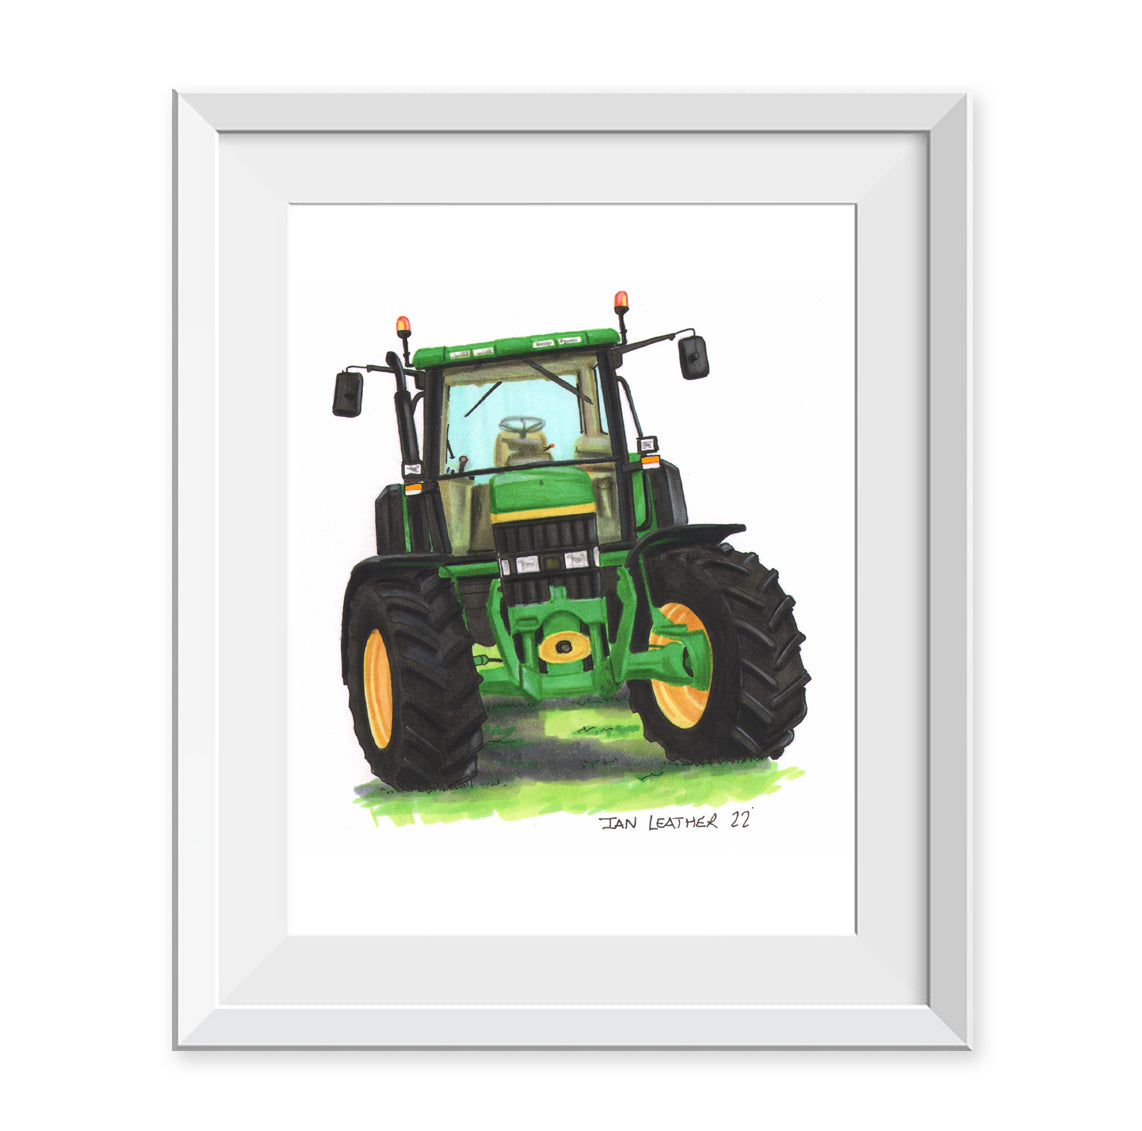 Load video: Timelapse of Ian Leather doing a quick drawing of a John Deere Tractor to highlight his technique